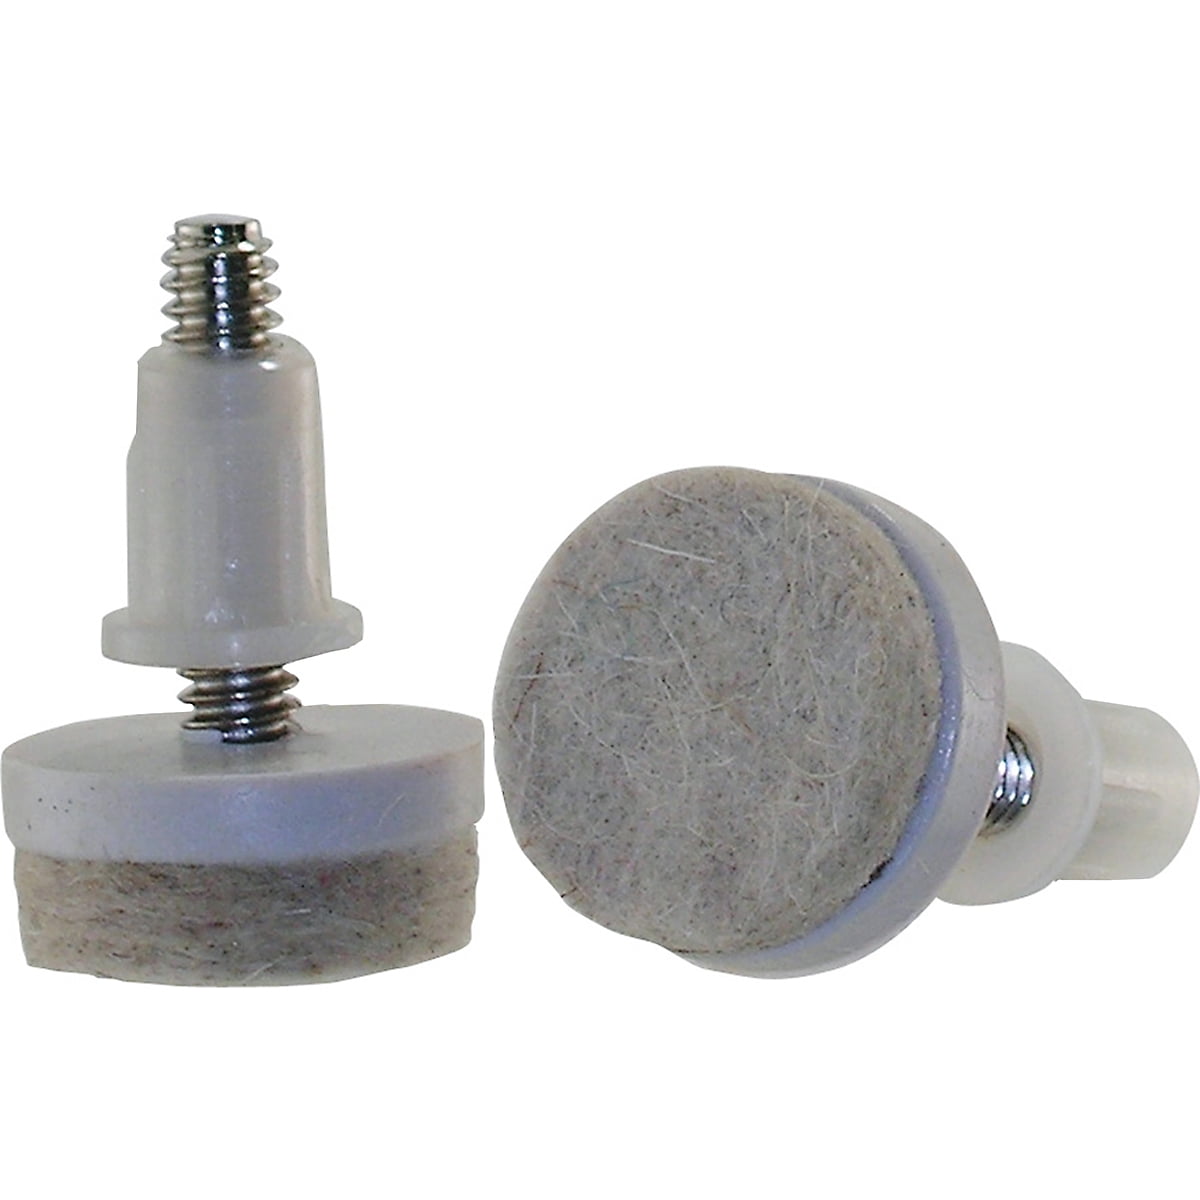 4 Non-swivel Threaded Glide Levelers with Metal Base 1" Stem 